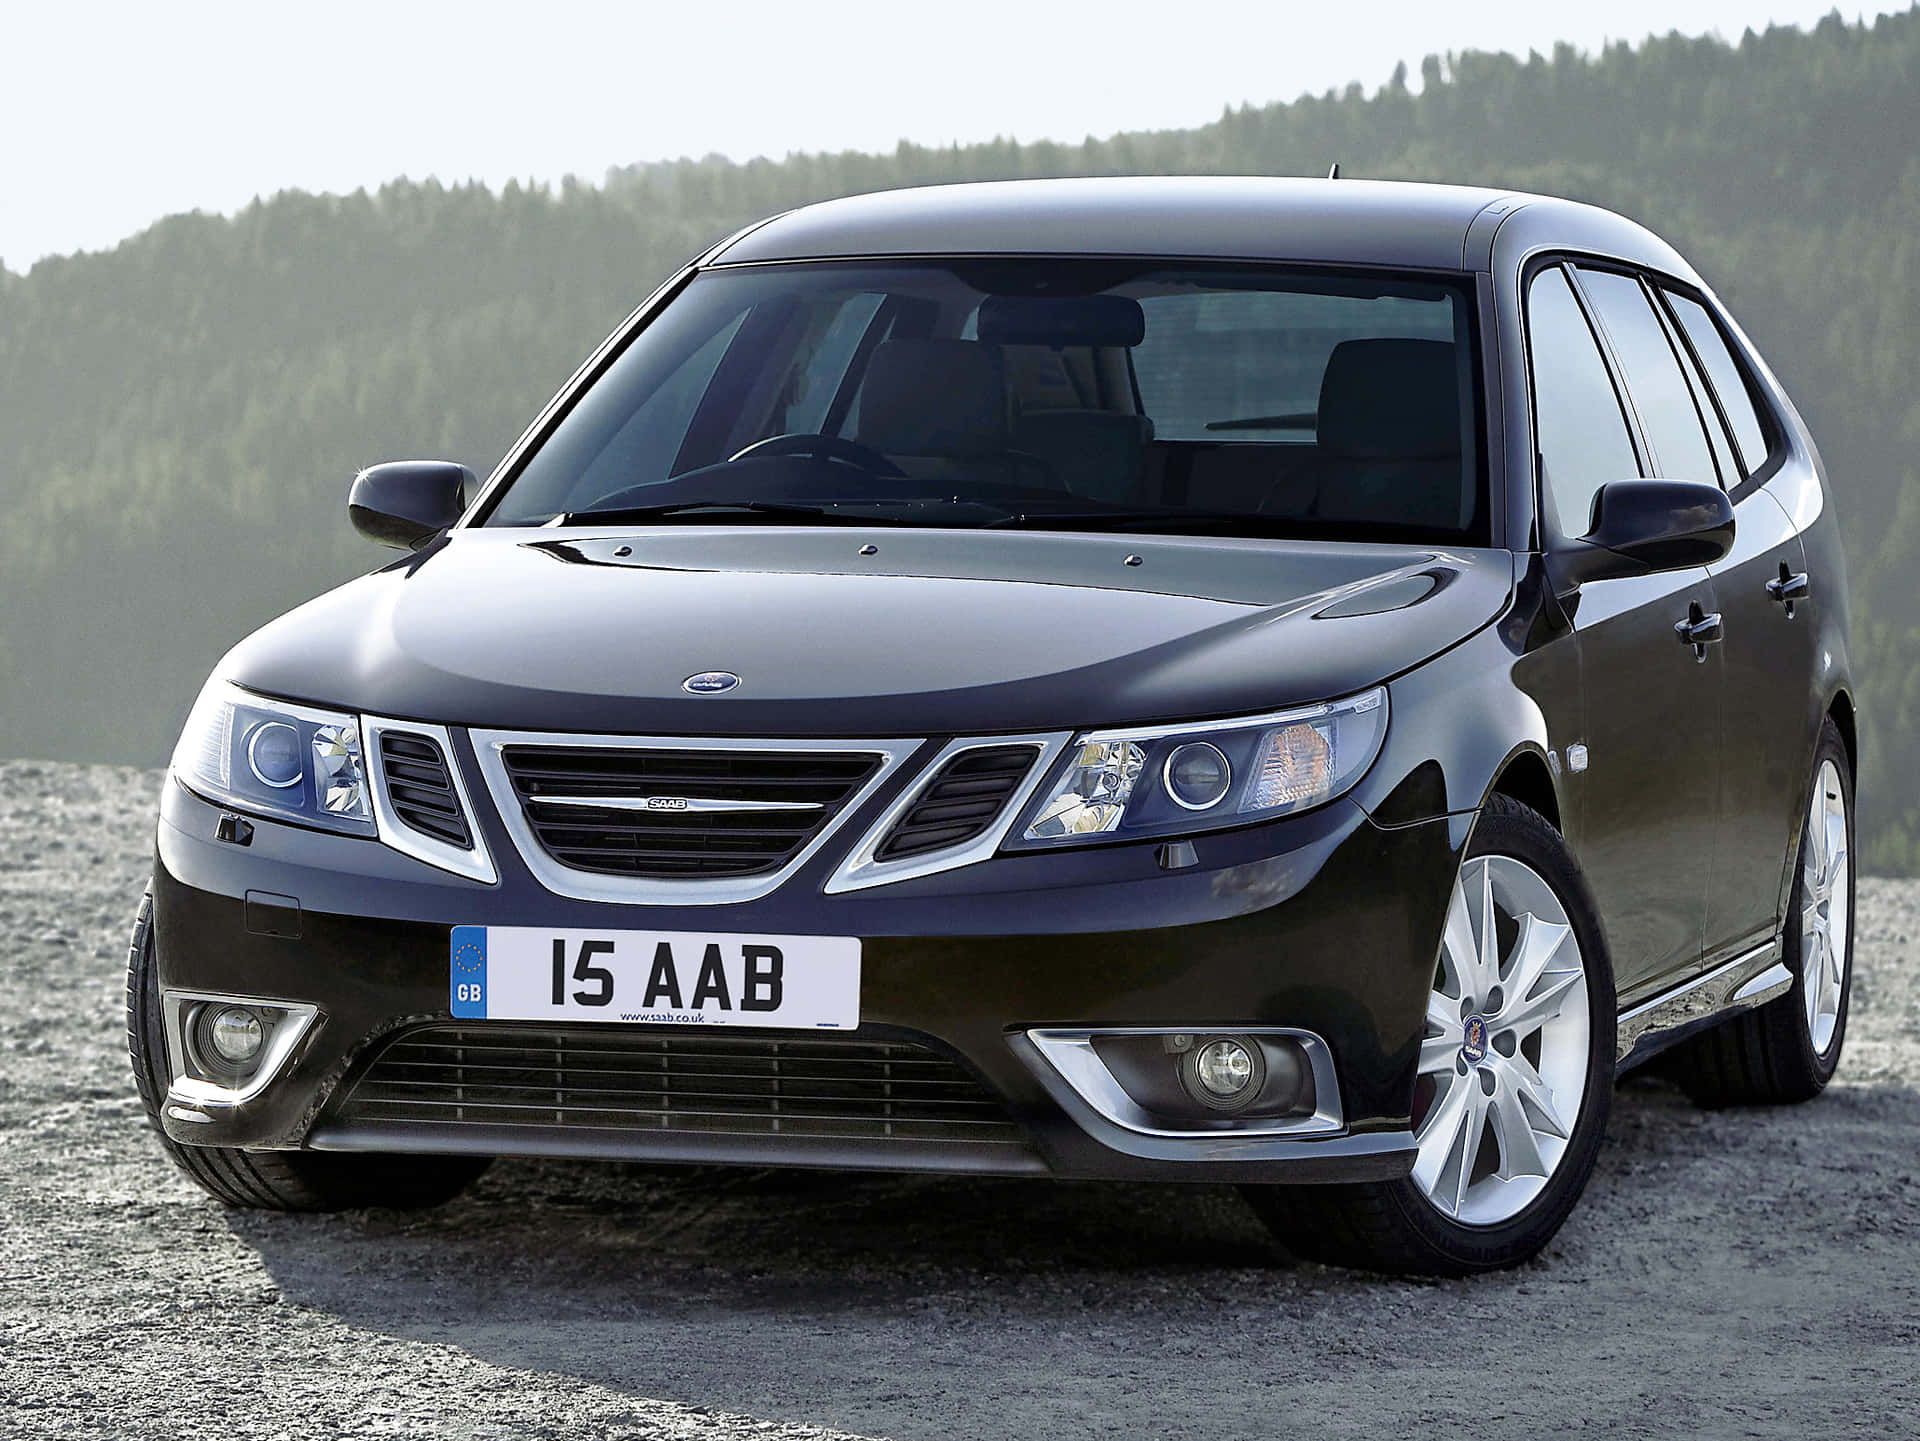 Sleek And Stylish Saab 9-5 In Pristine Condition Wallpaper